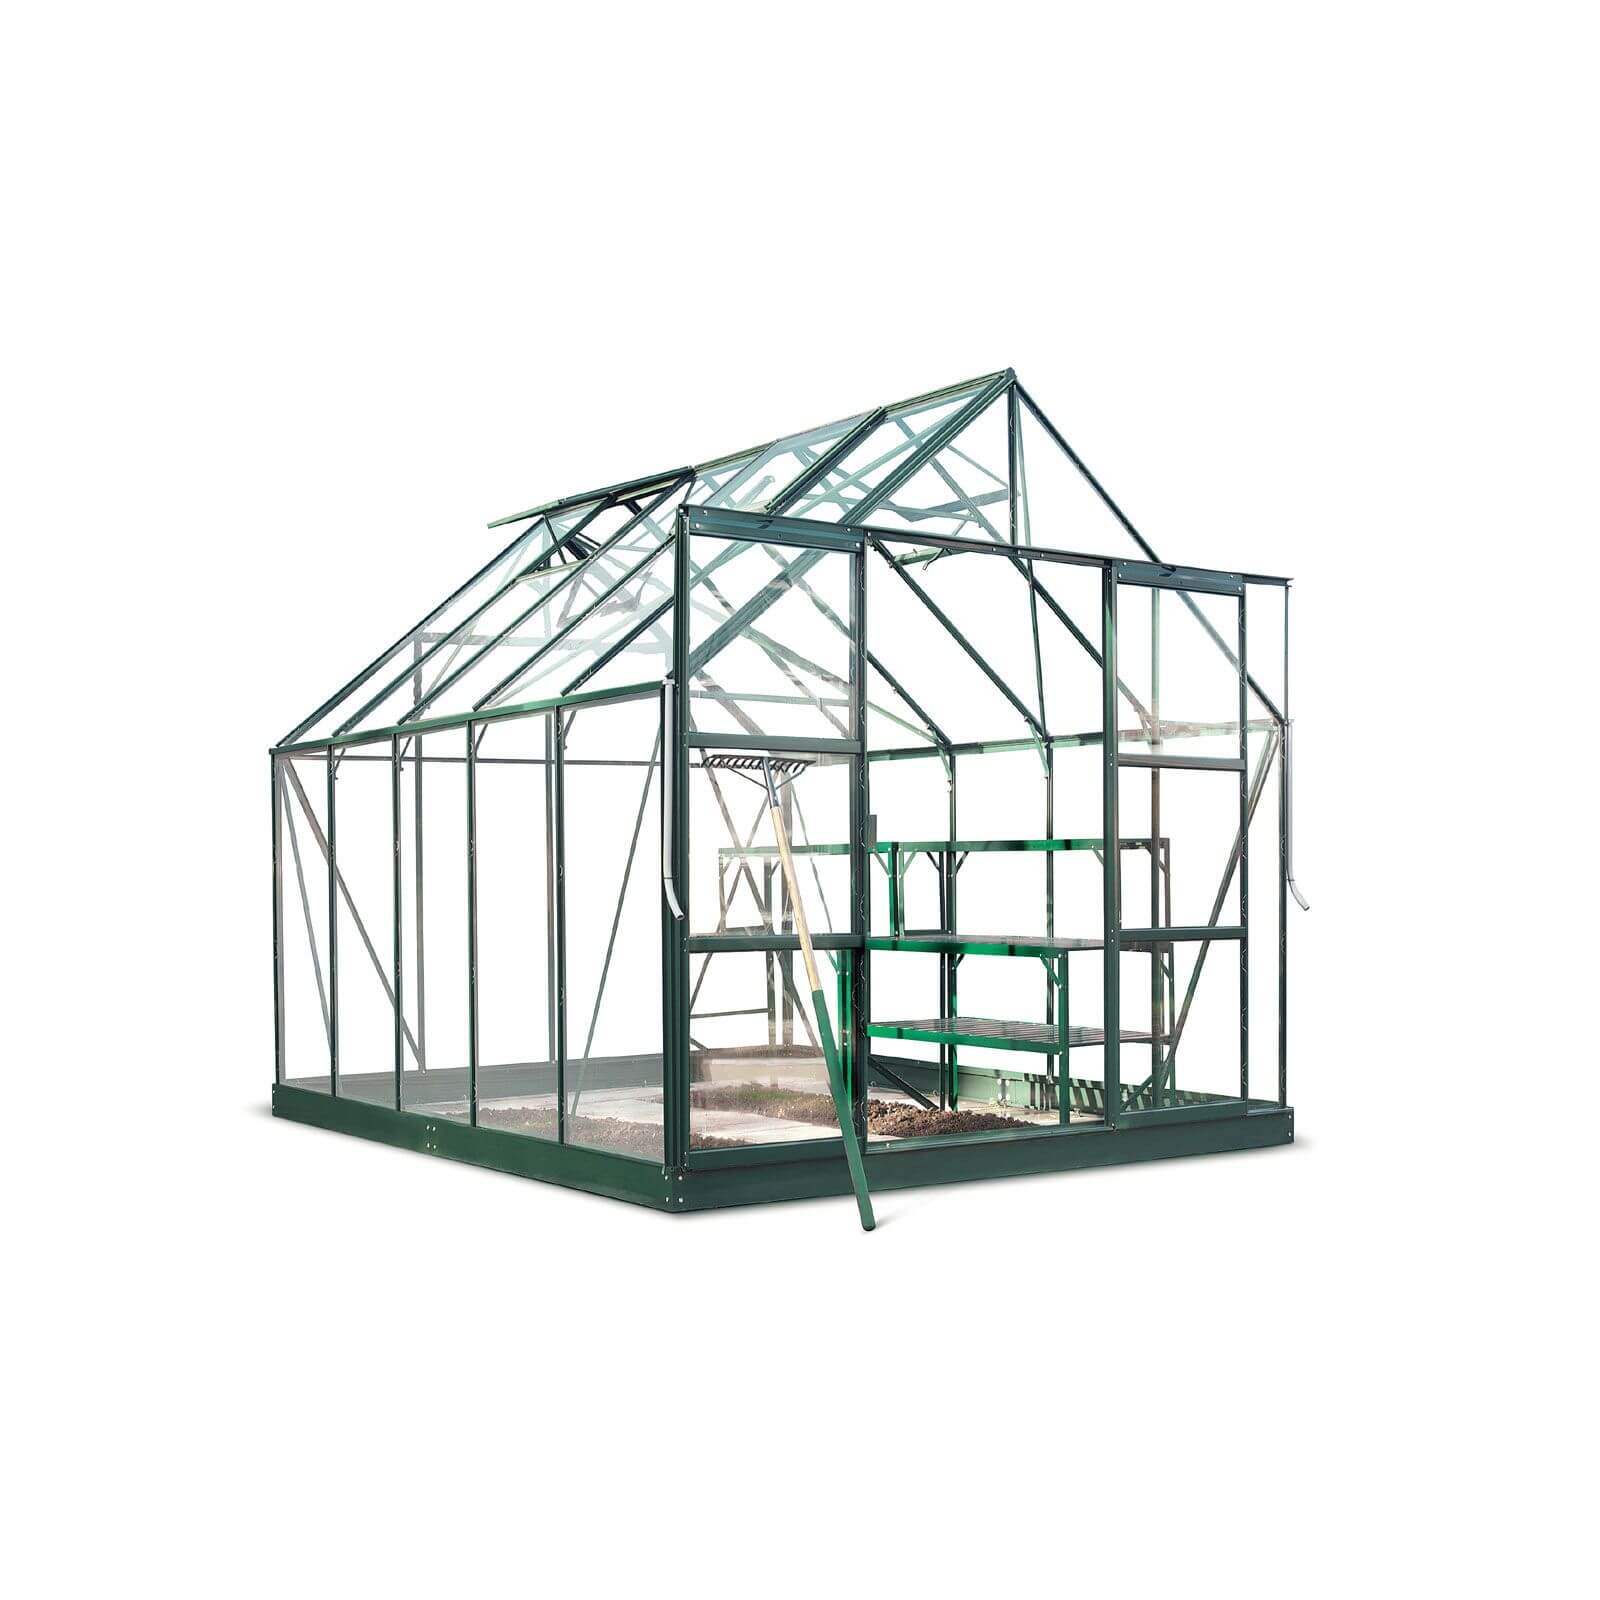 Halls 10 x 8ft Aluminium Magnum Green Greenhouse with Horticultural Glass & Base